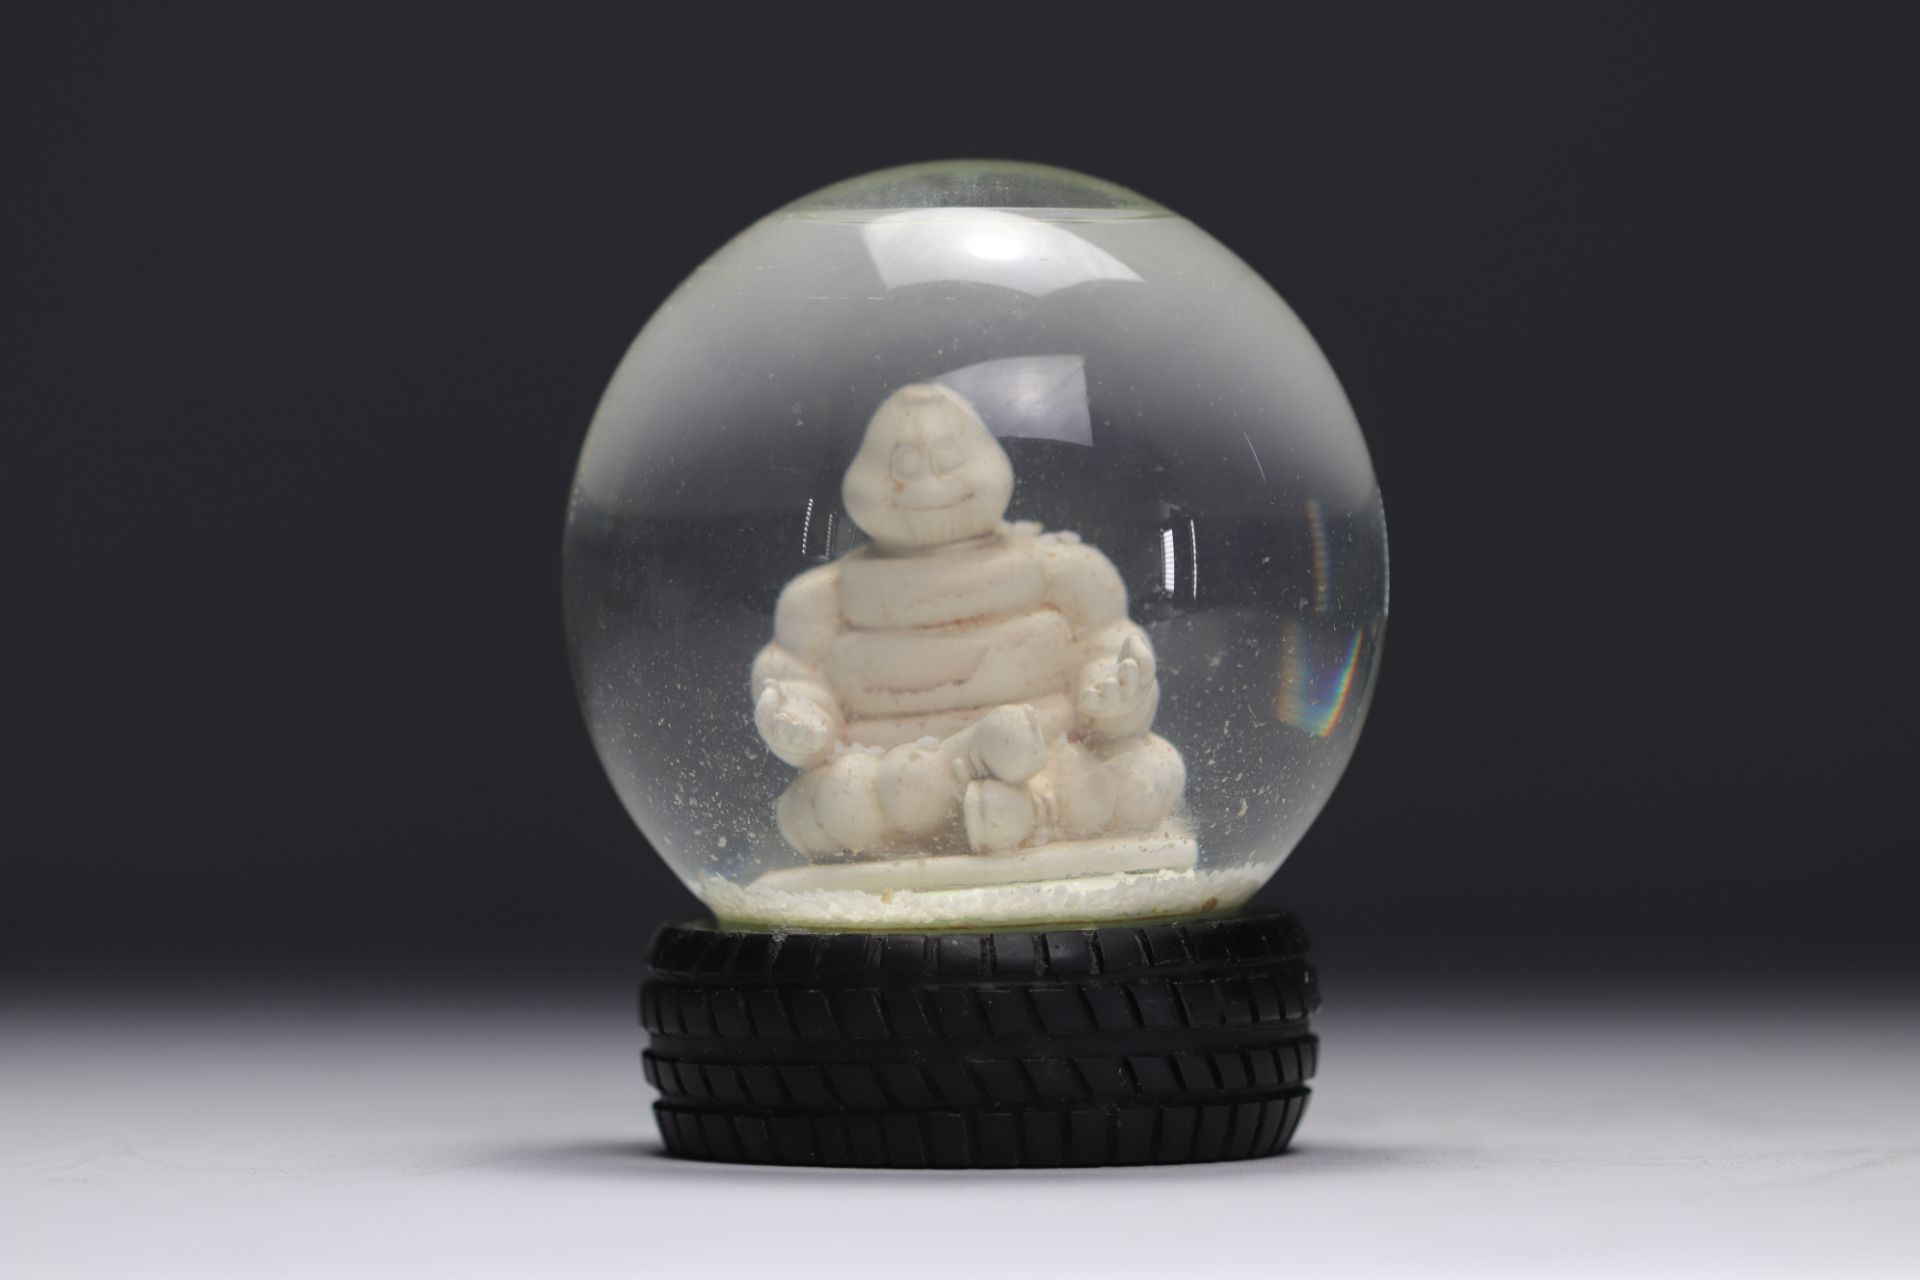 Michelin. 2007. Snow globe representing the Michelin Man in lotus position. Tire-shaped base. Number